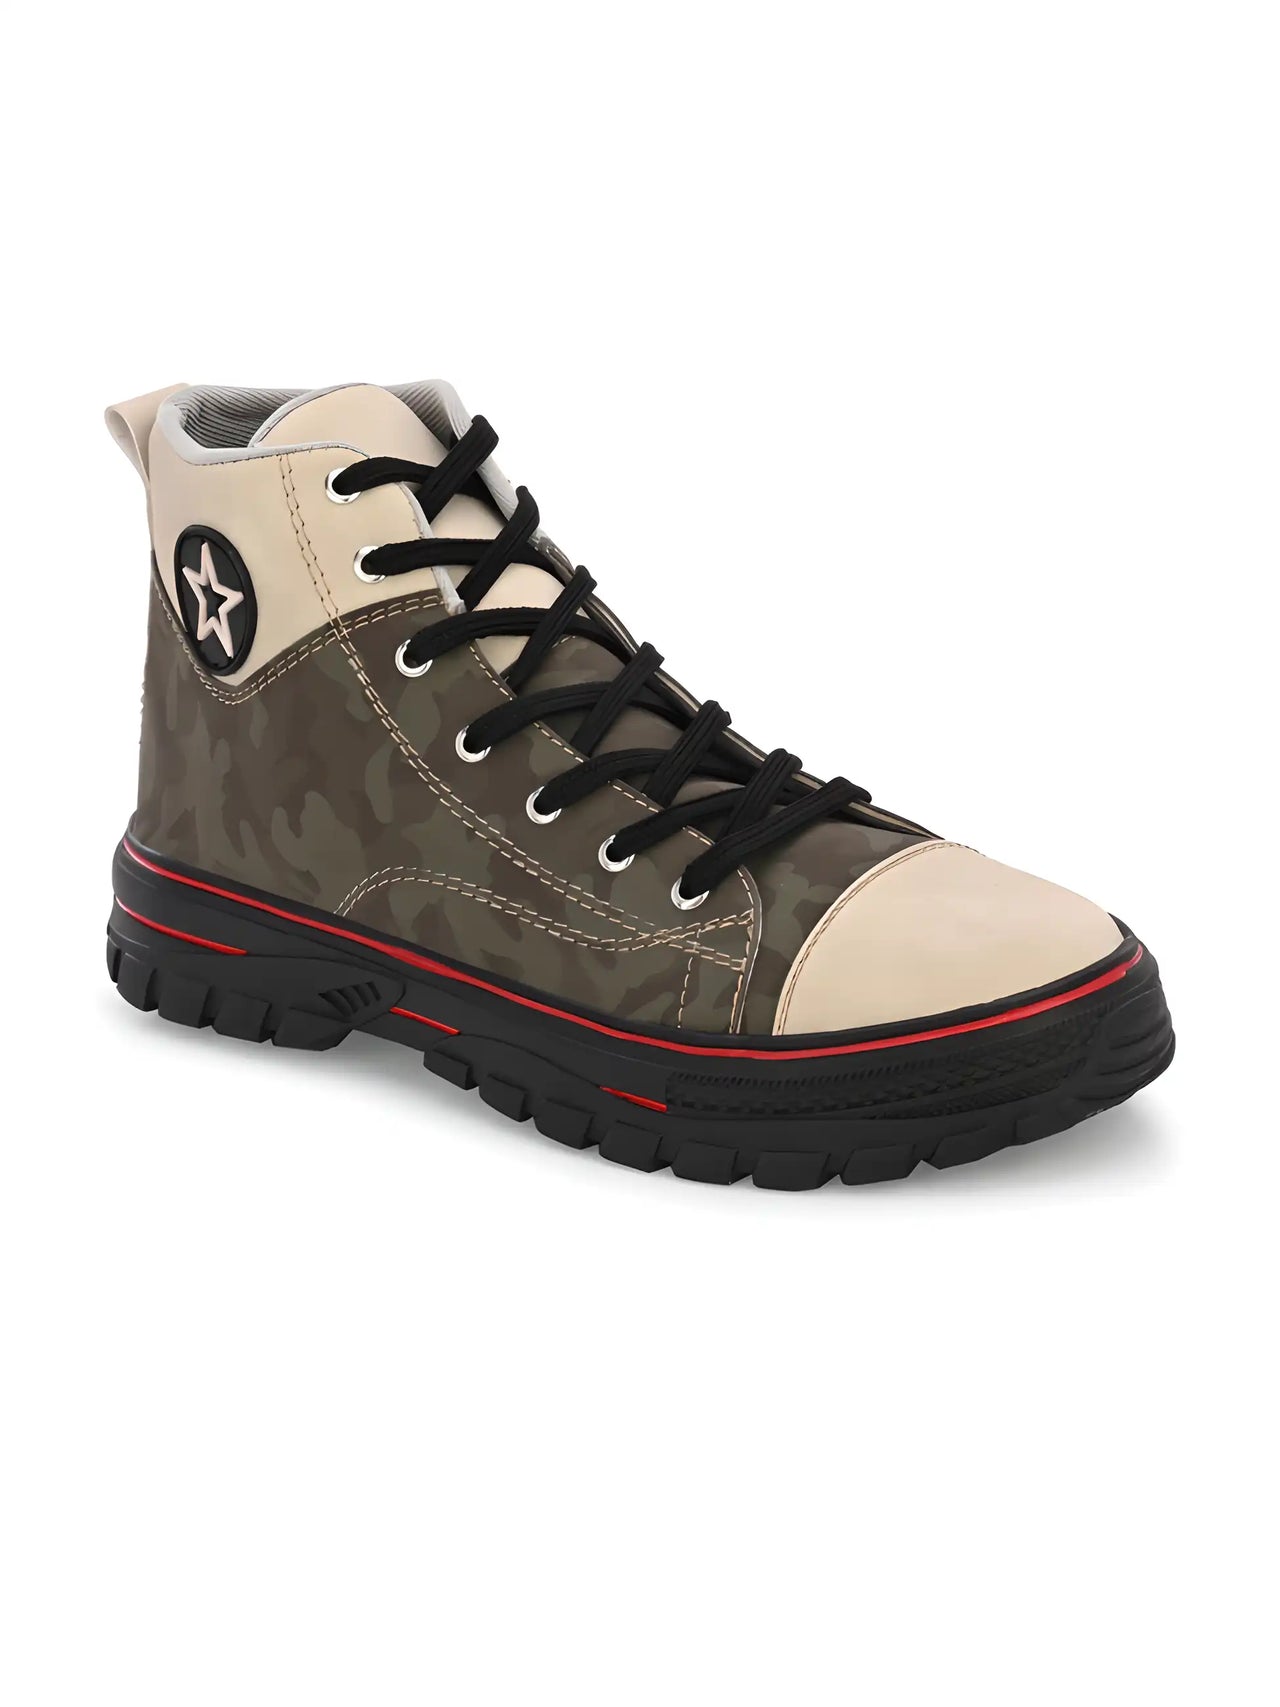 Bucik Men Olive Synthetic Leather Lace-Up Boots